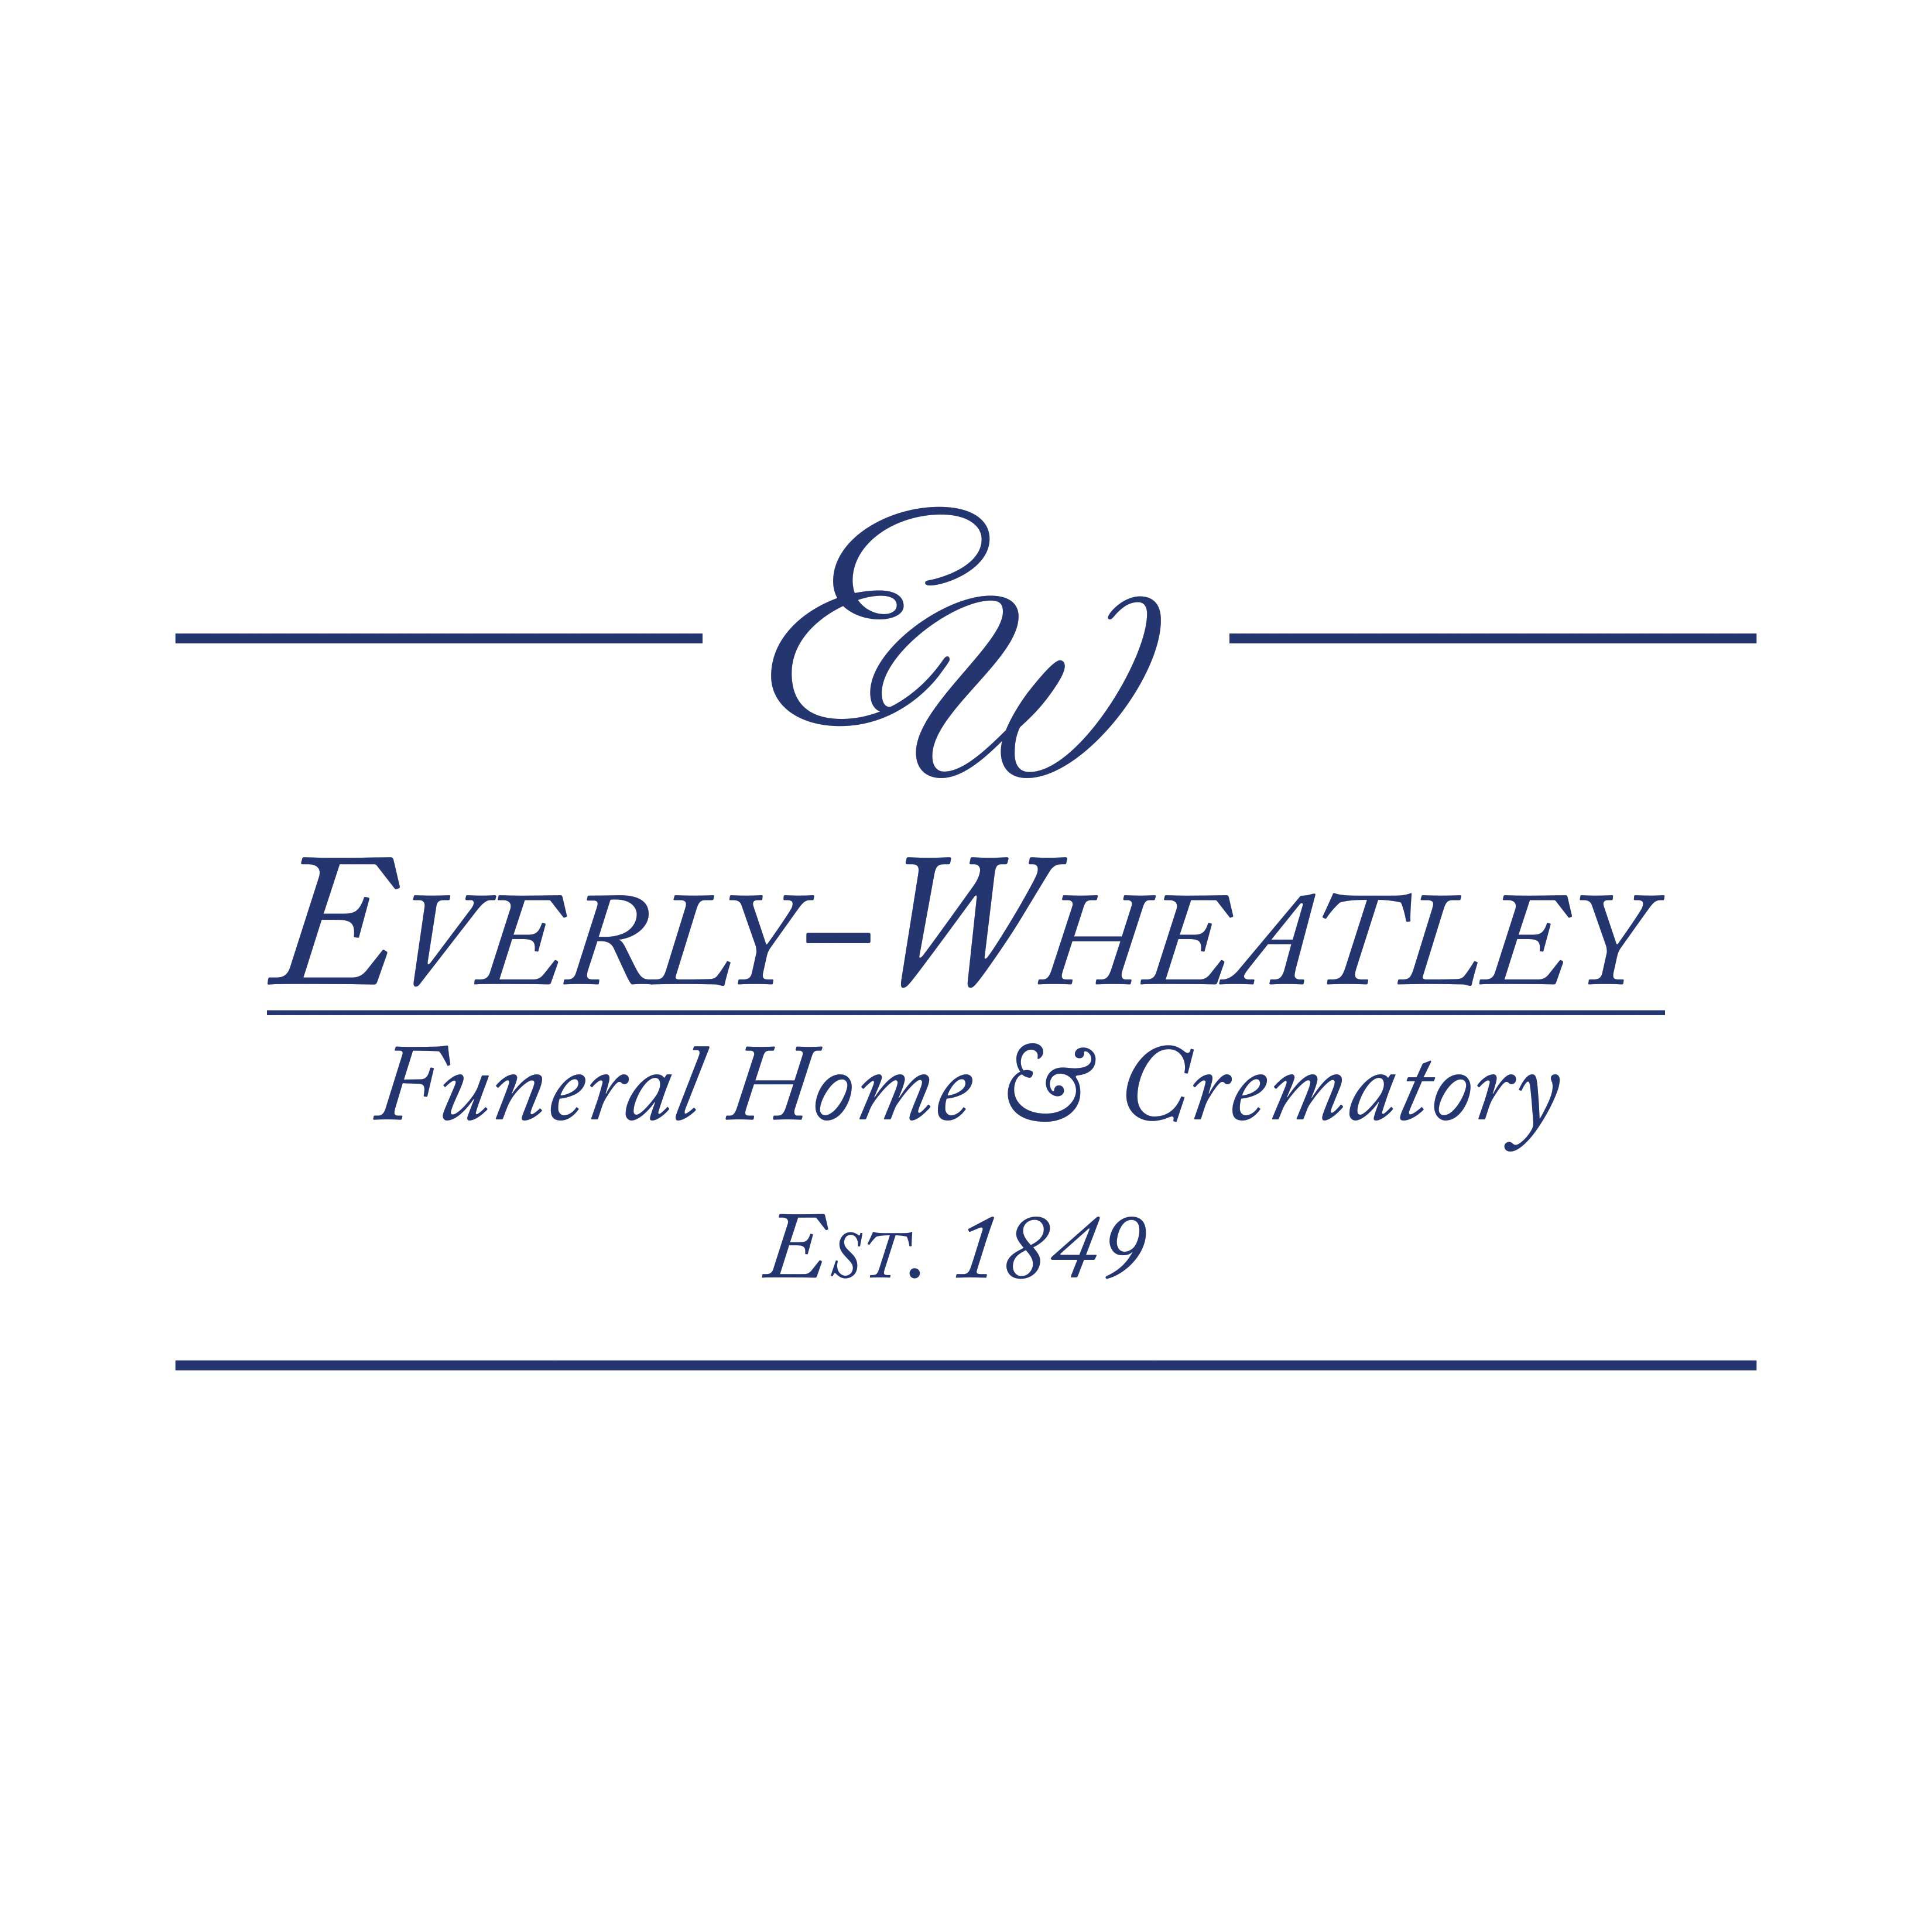 Everly Wheatley Funeral Home